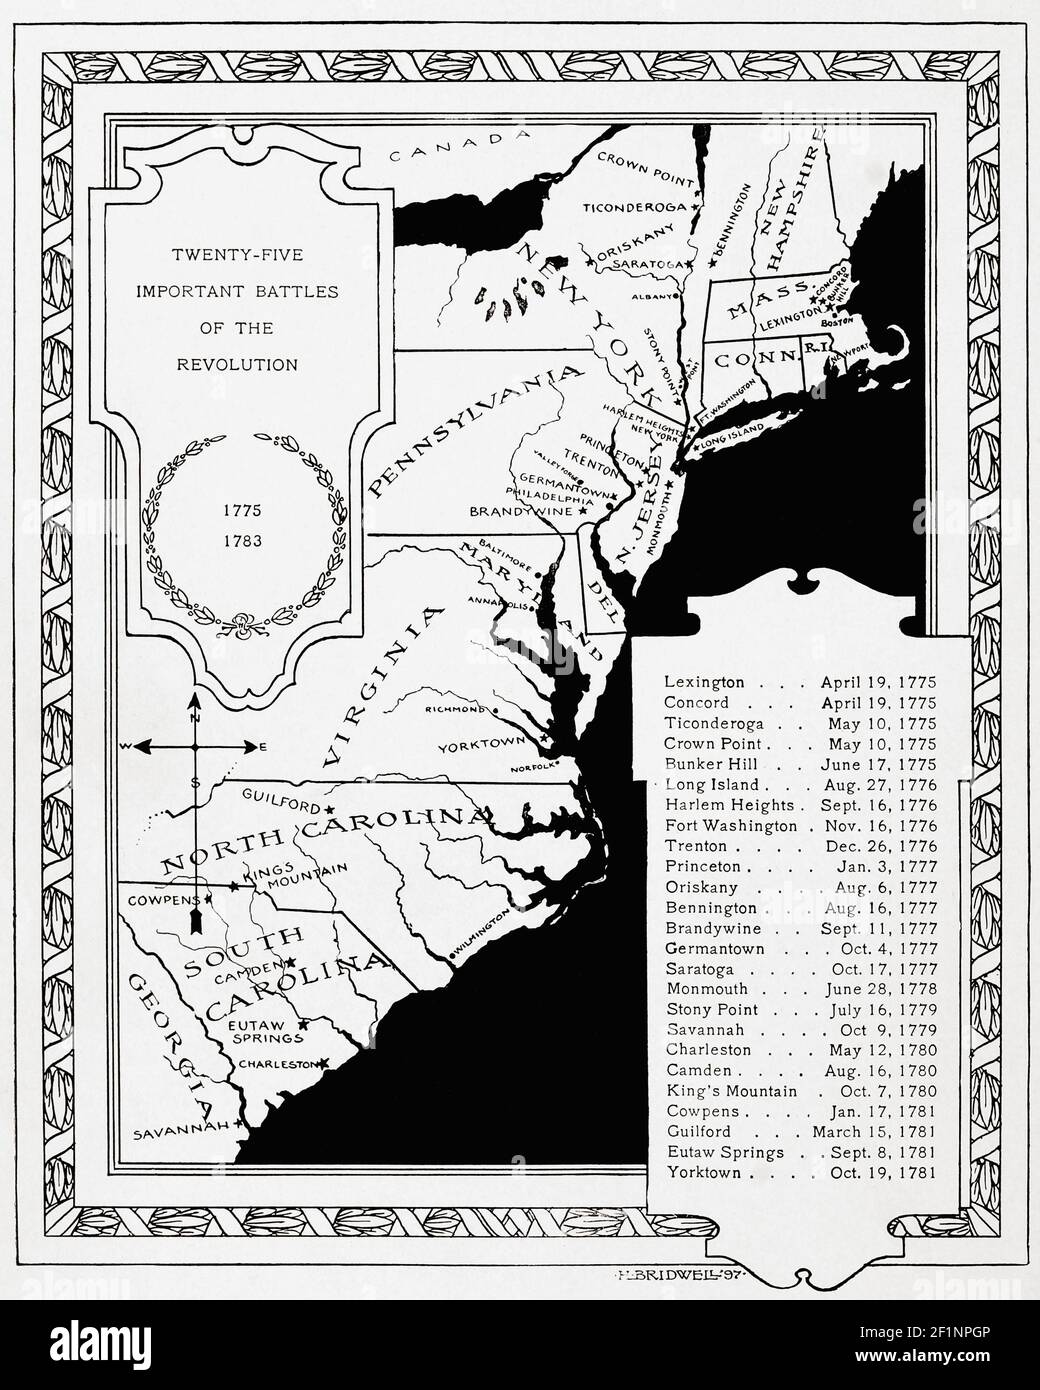 25 Important Battles of the Revolution.  Map published 1897 of major battles of the American Revolutionary War. Stock Photo